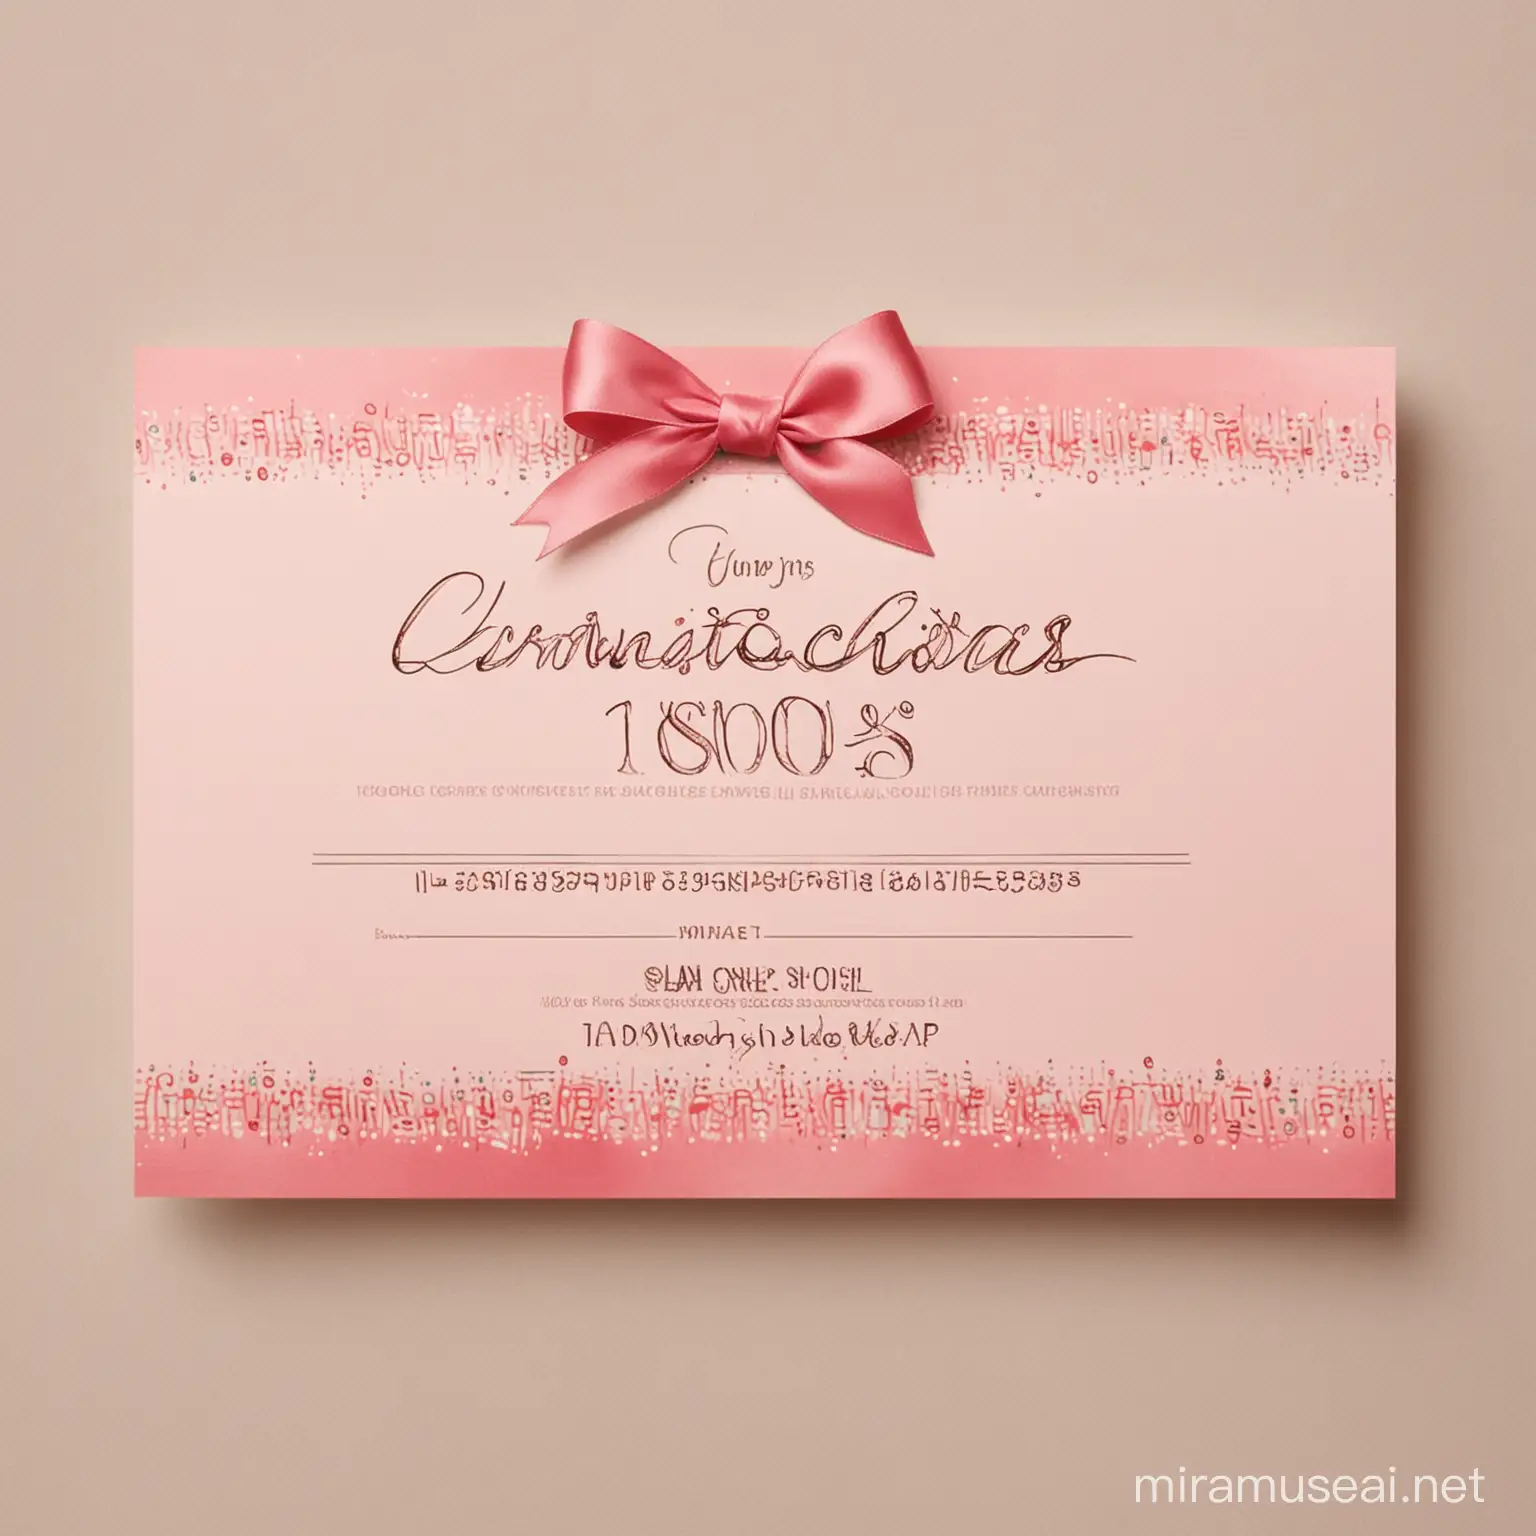 Cosmetologist Services Gift Certificate Value 100 Shekels